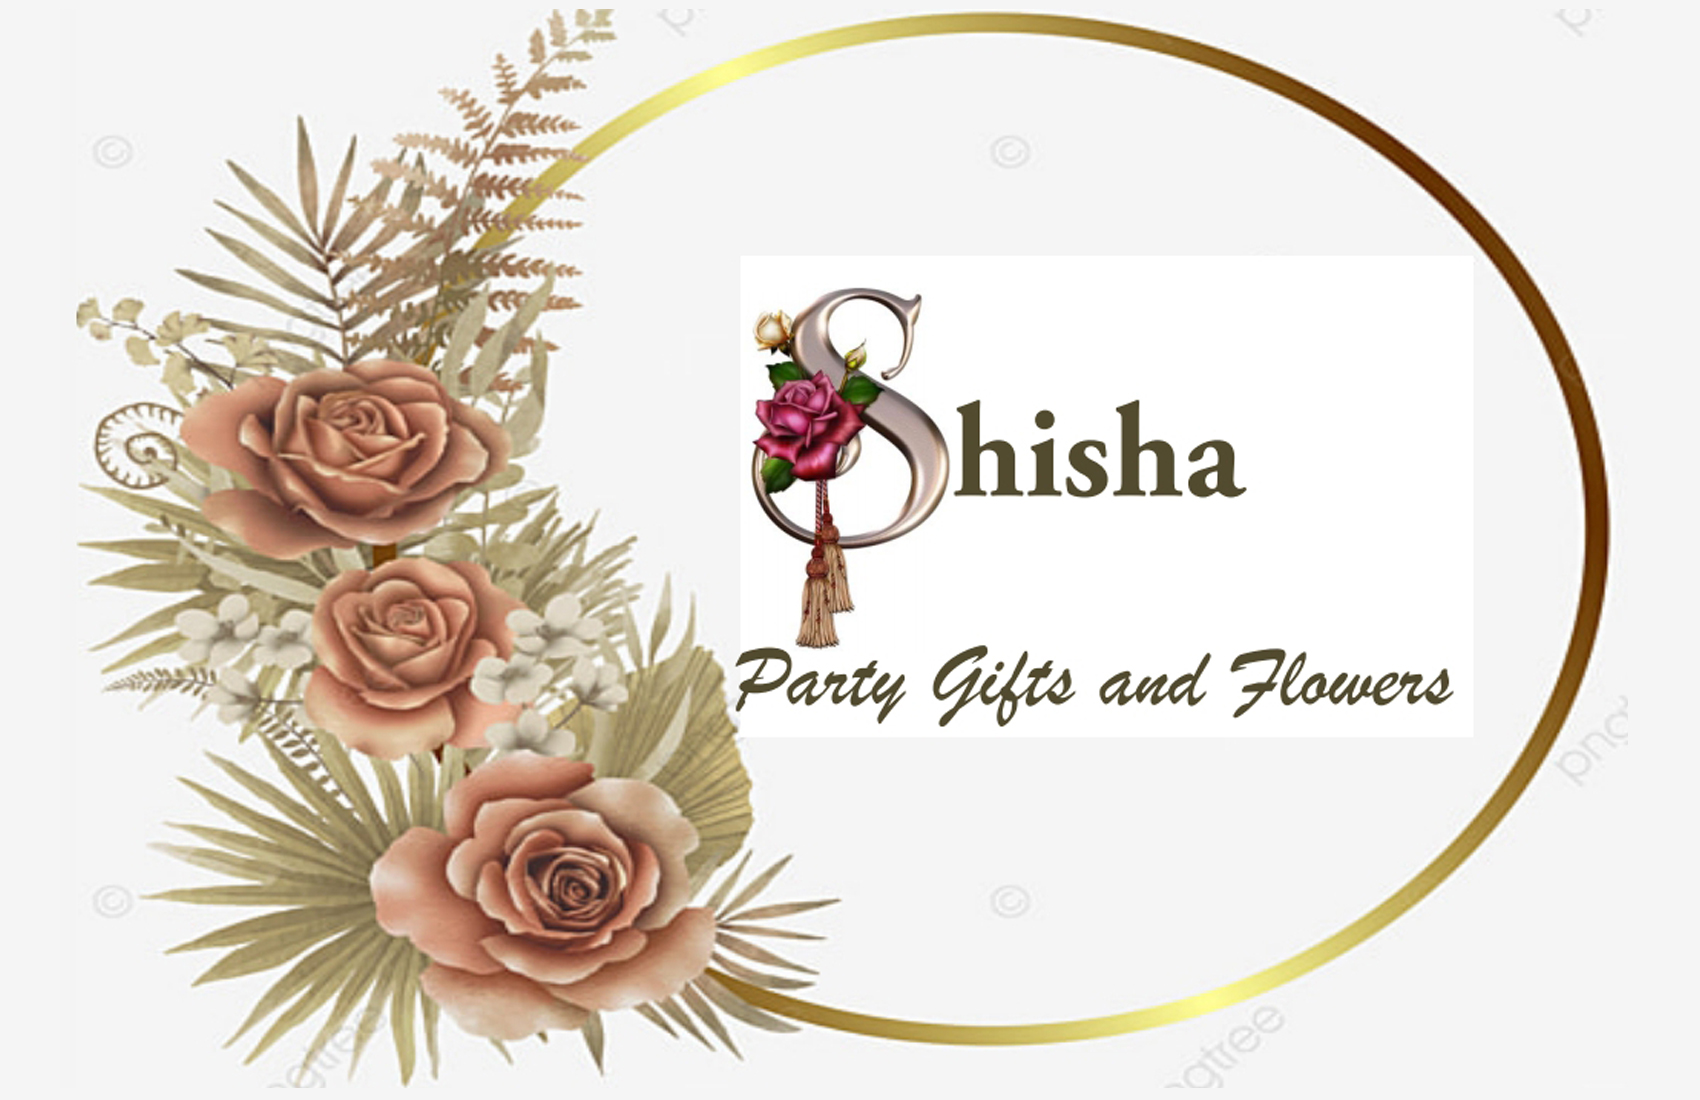 Shisha Party Gifts and Flowershop